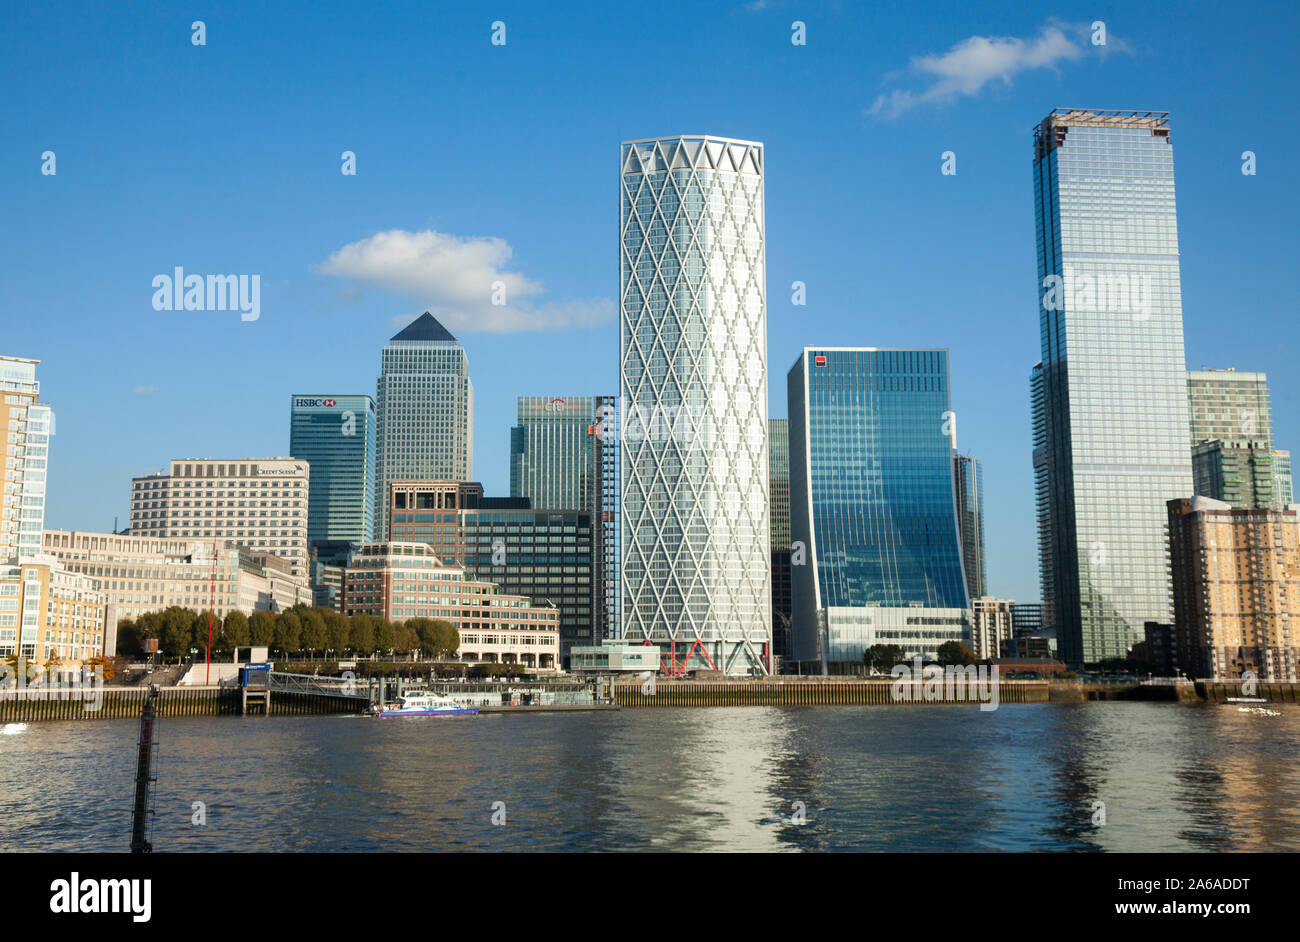 Canary Wharf Docklands London  Photographed in Nov 2019 Stock Photo